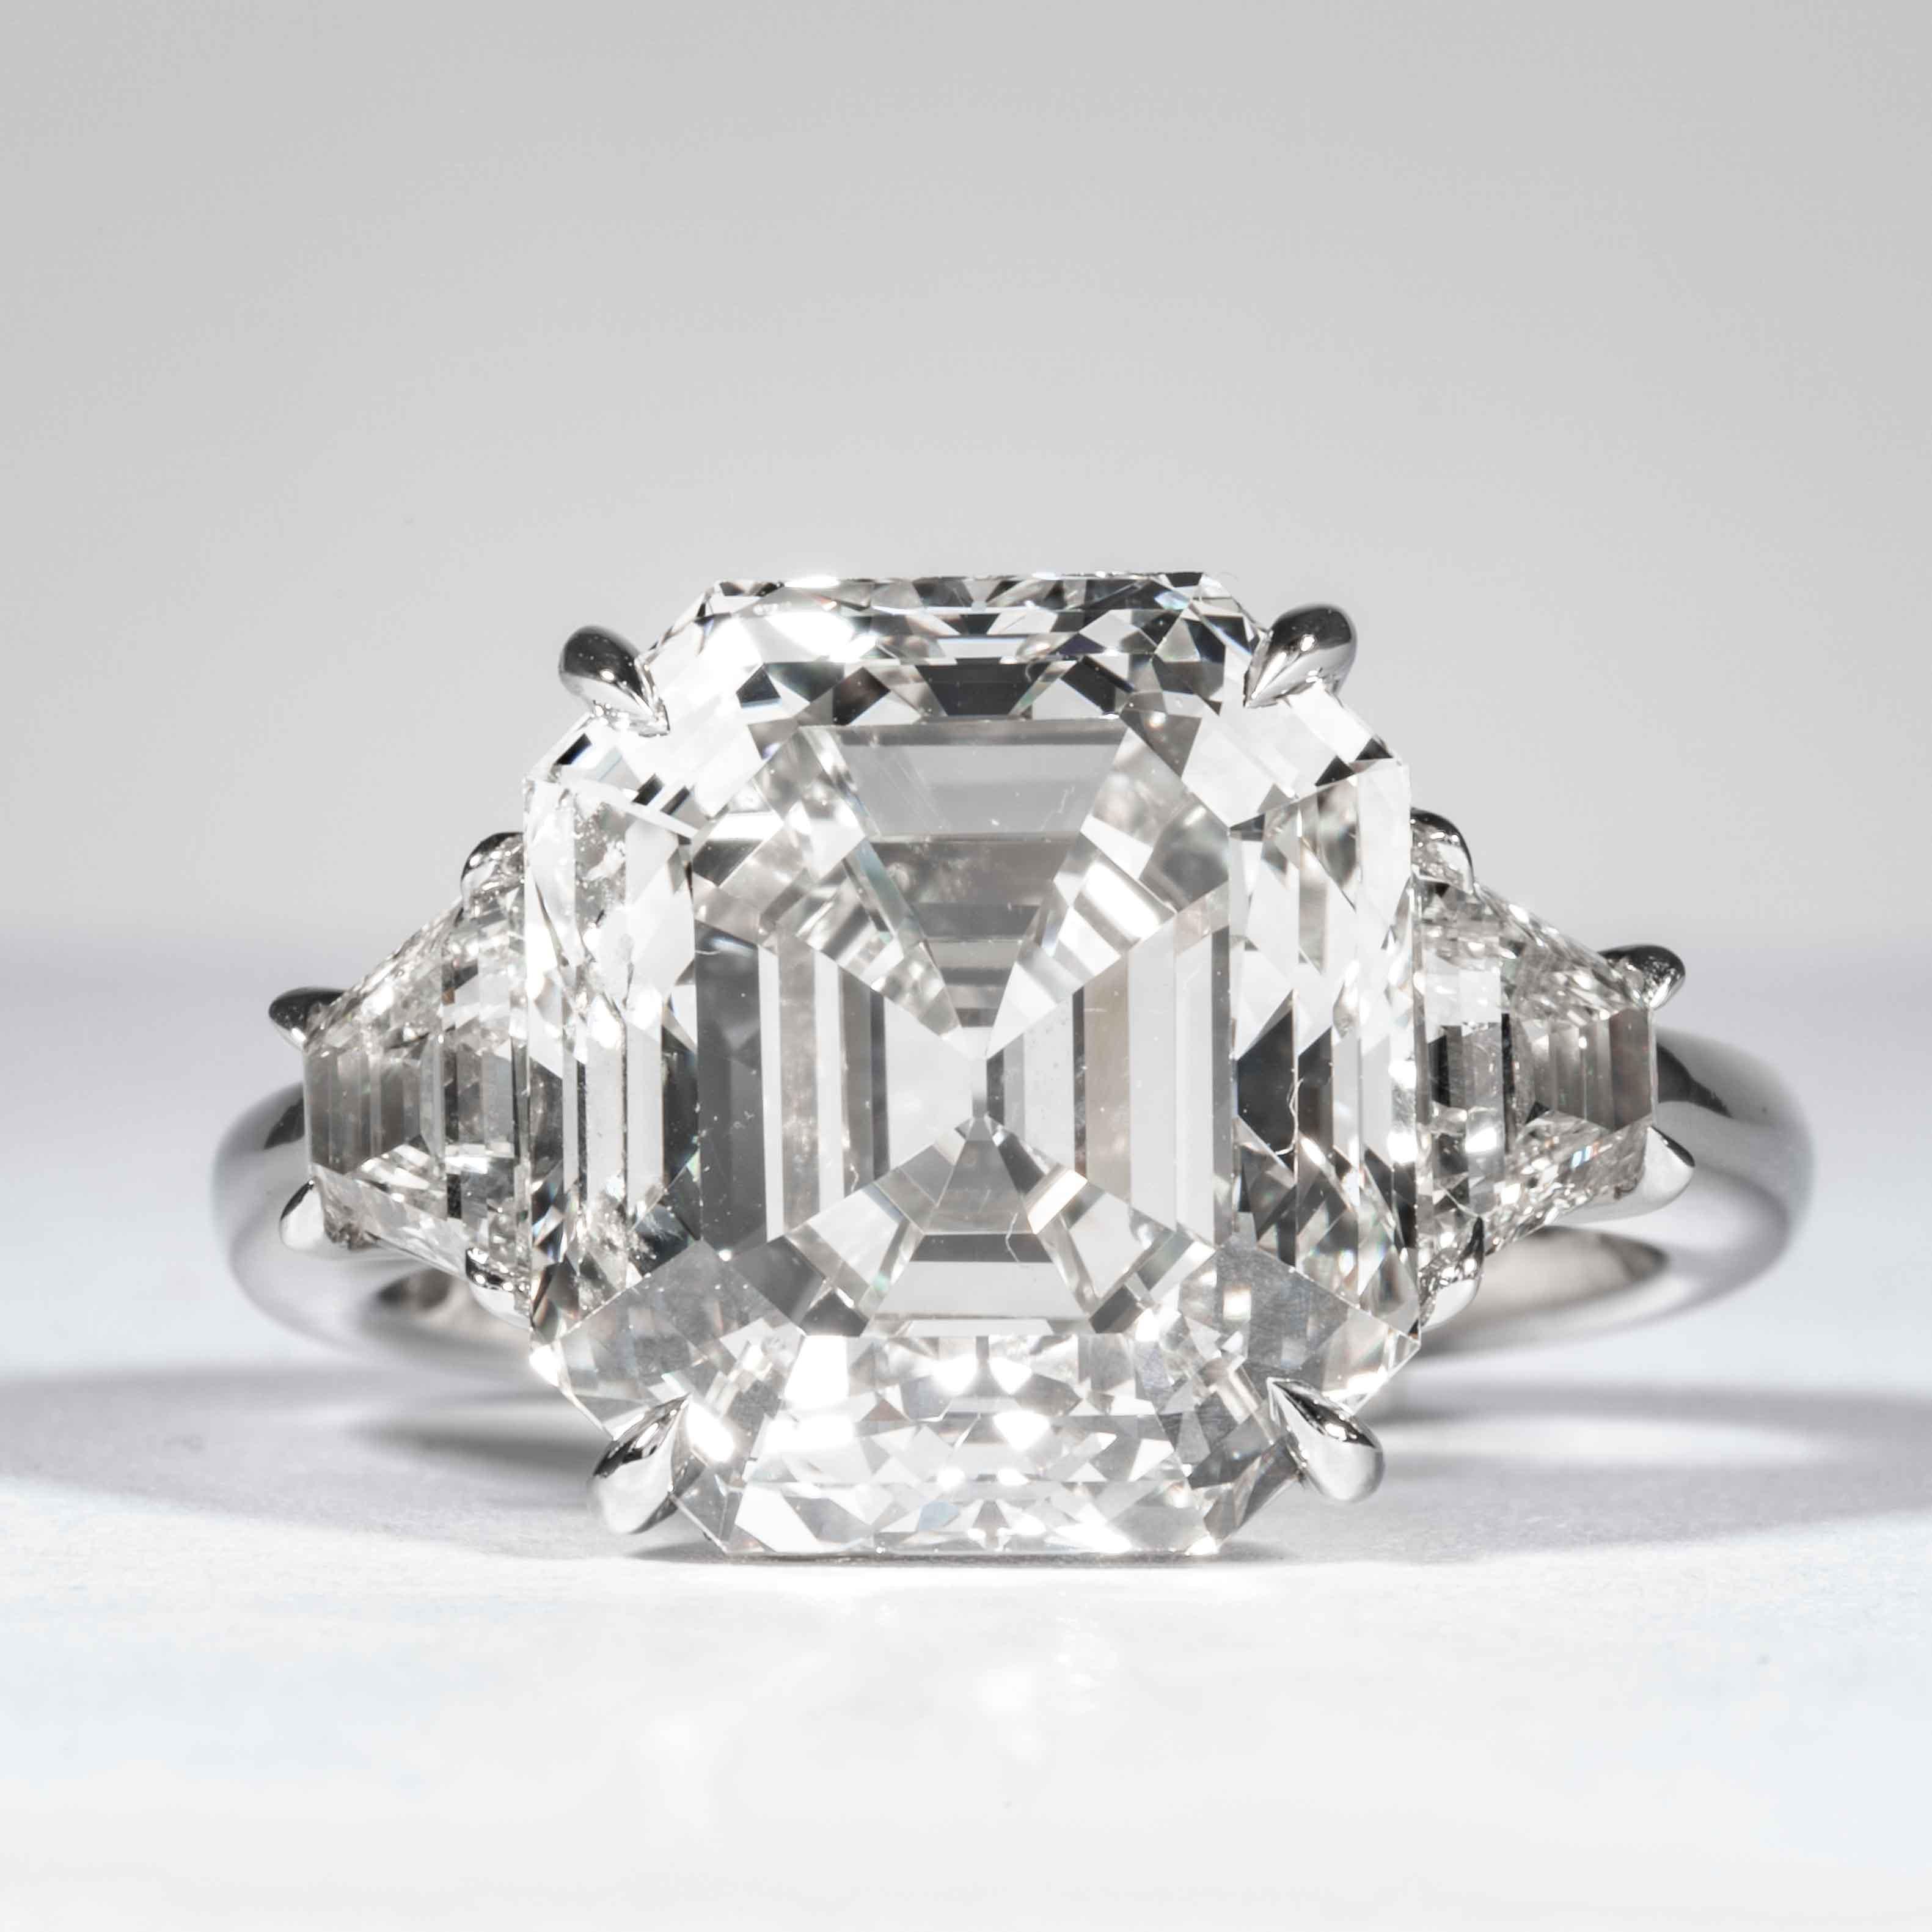 This diamond ring is offered by Shreve, Crump & Low. This 10.04 carat GIA Certified L VS1 square emerald cut more commonly referred to as an Asscher cut diamond measuring 12.63 x 11.41 x 8.40 mm is custom set in a handcrafted Shreve, Crump & Low